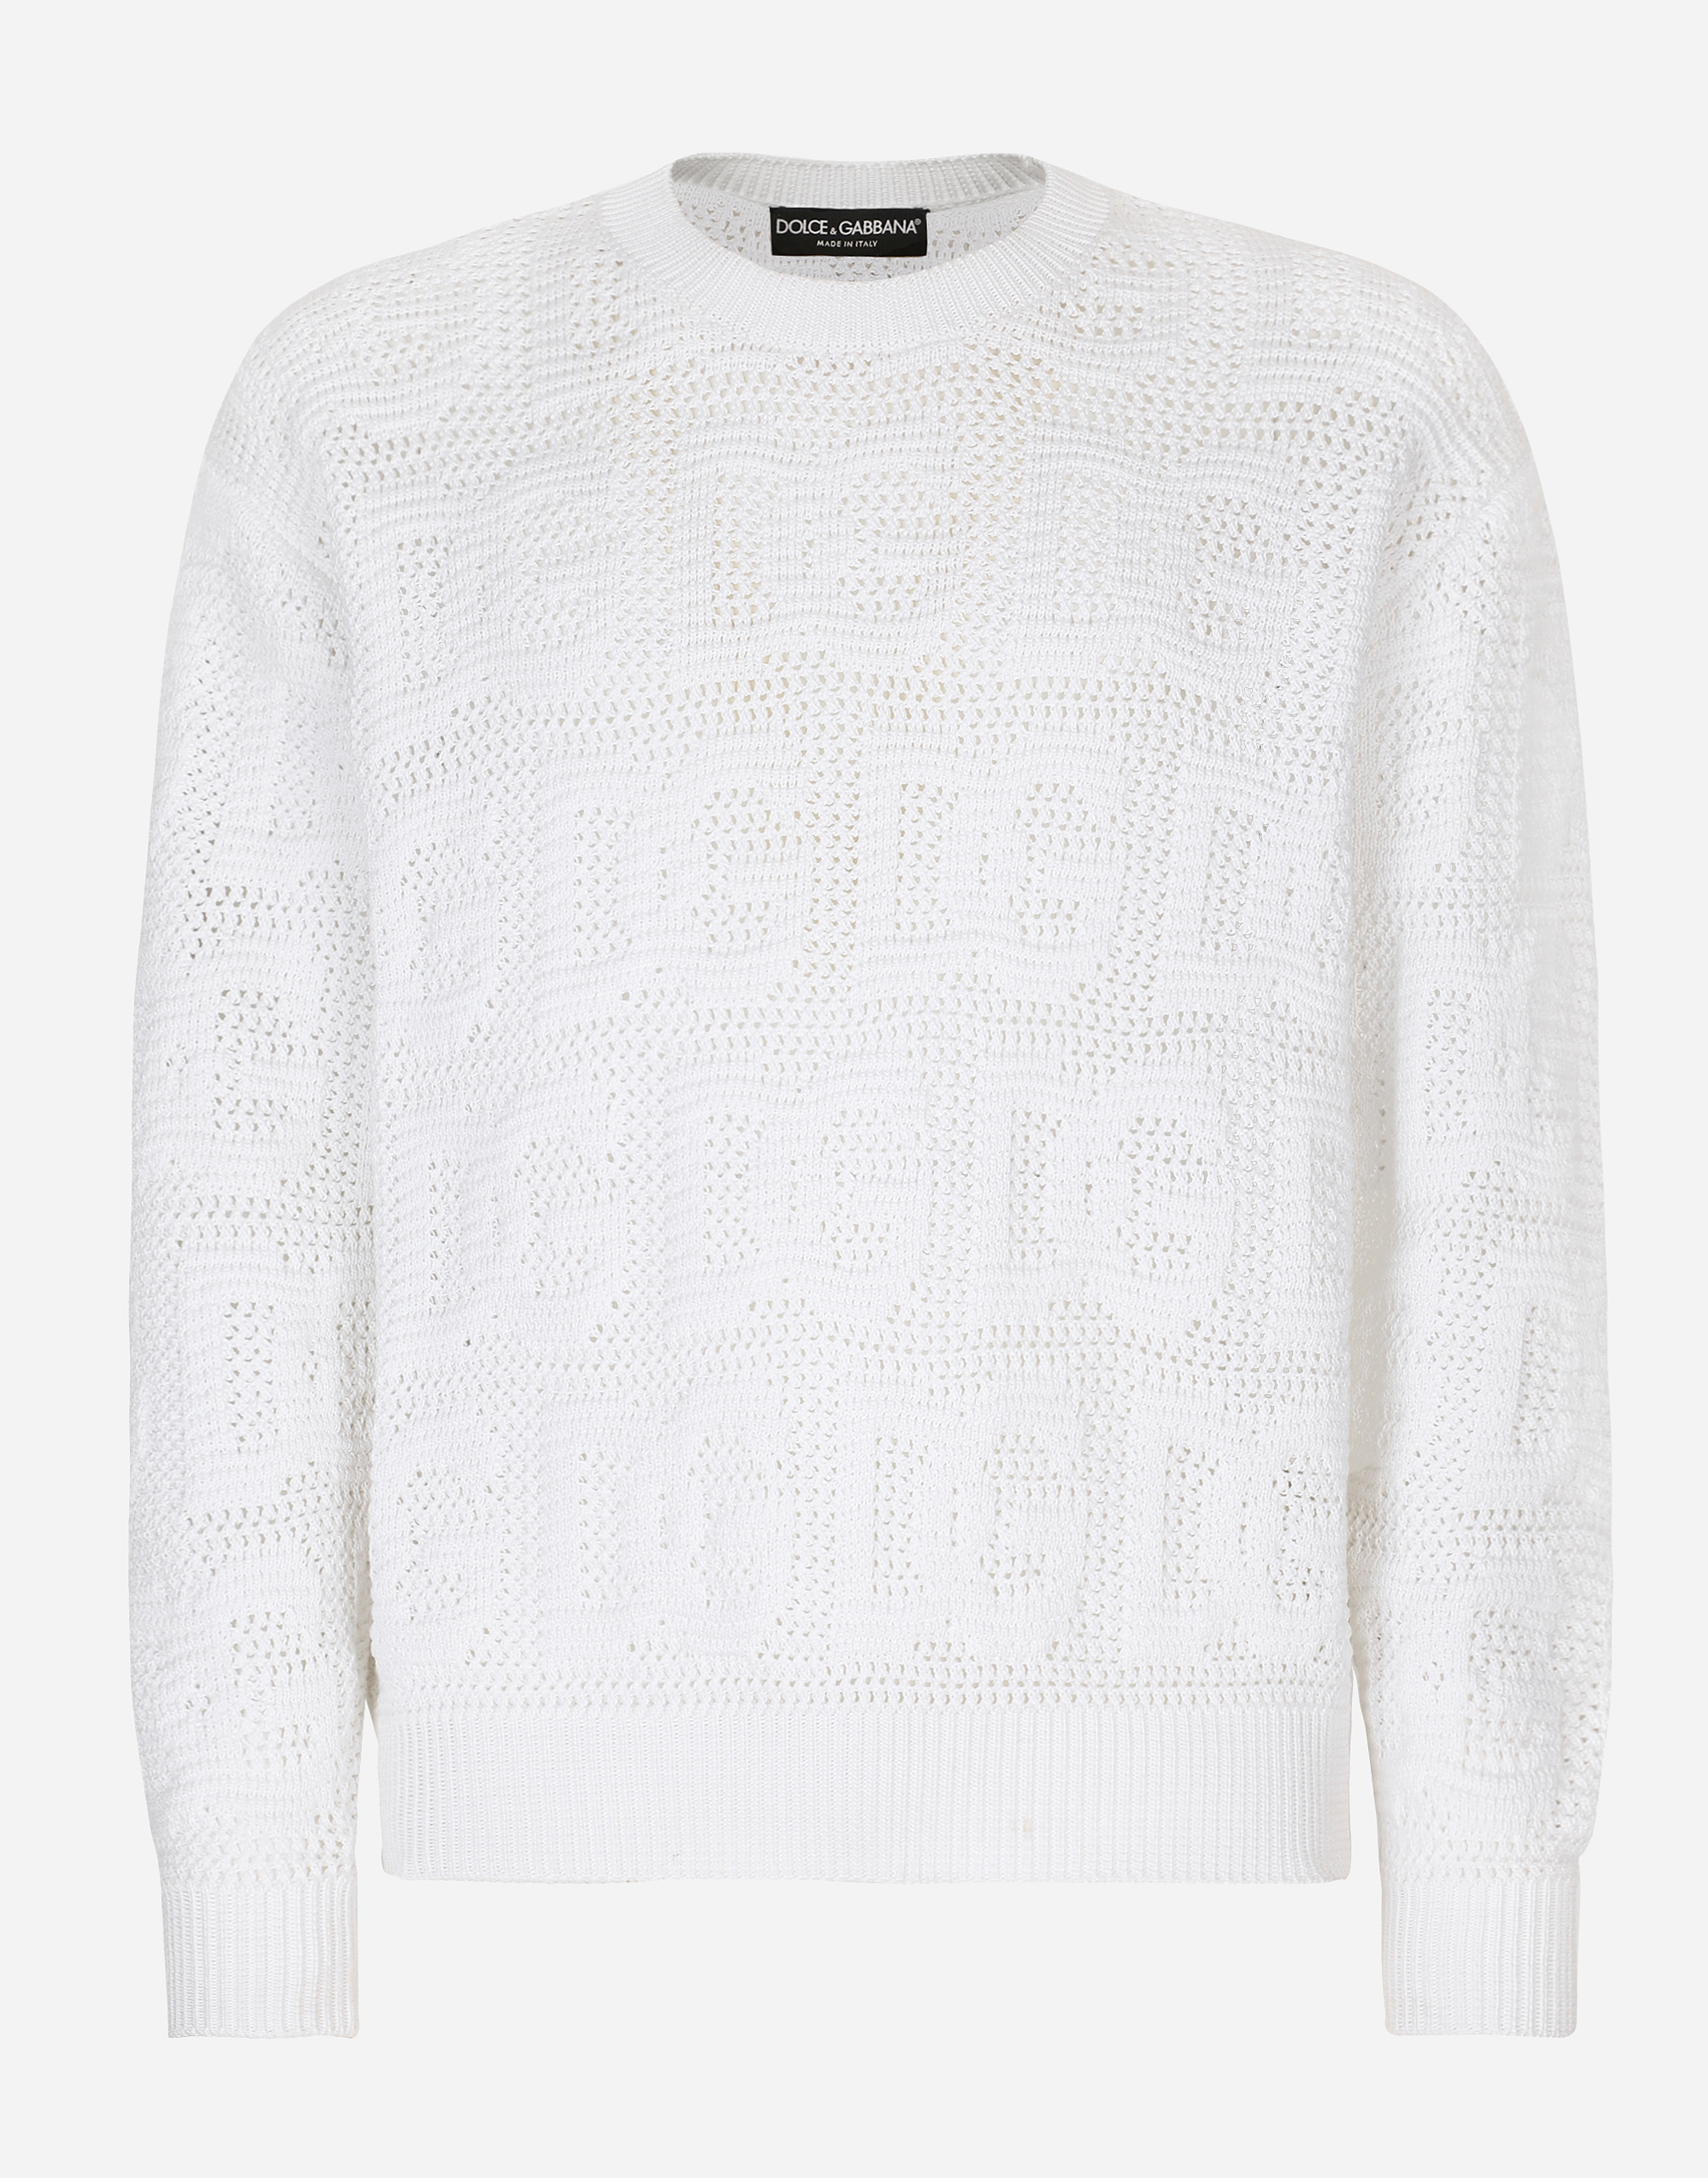 Cotton jacquard sweater with all-over jacquard DG in White